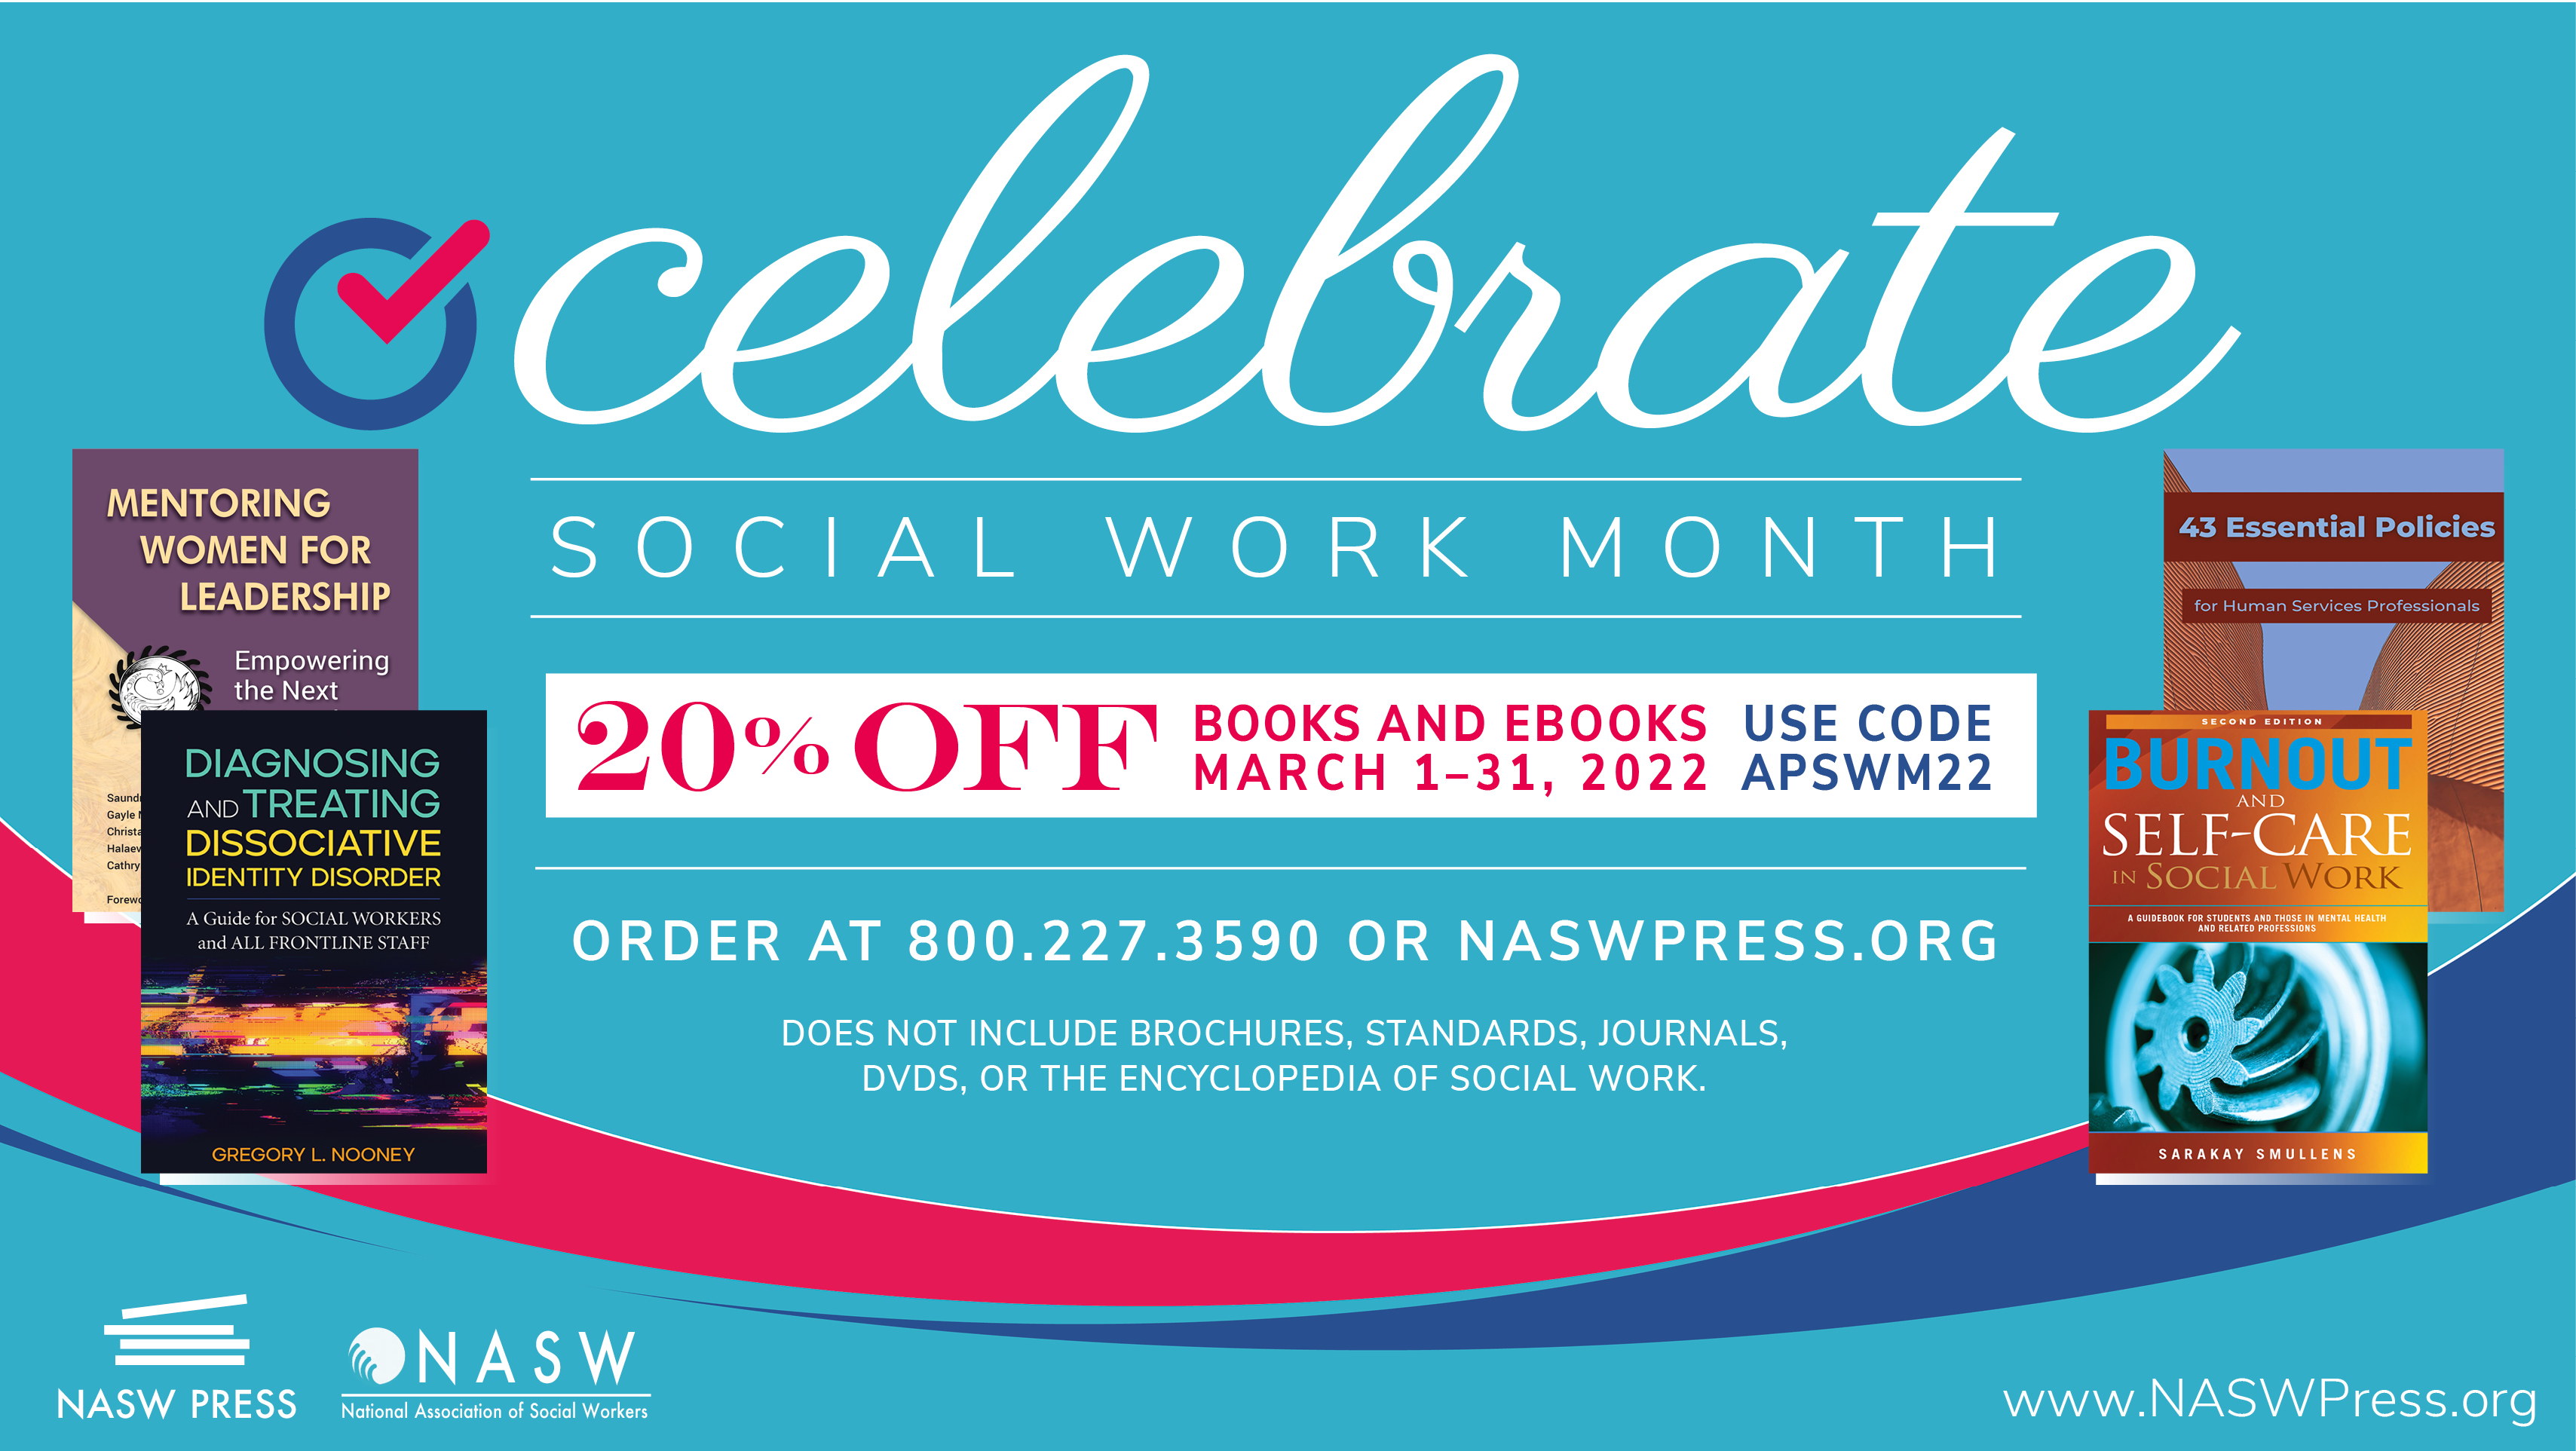 Celebrate Social Work Month with NASW Press: 20% Off Books and eBooks